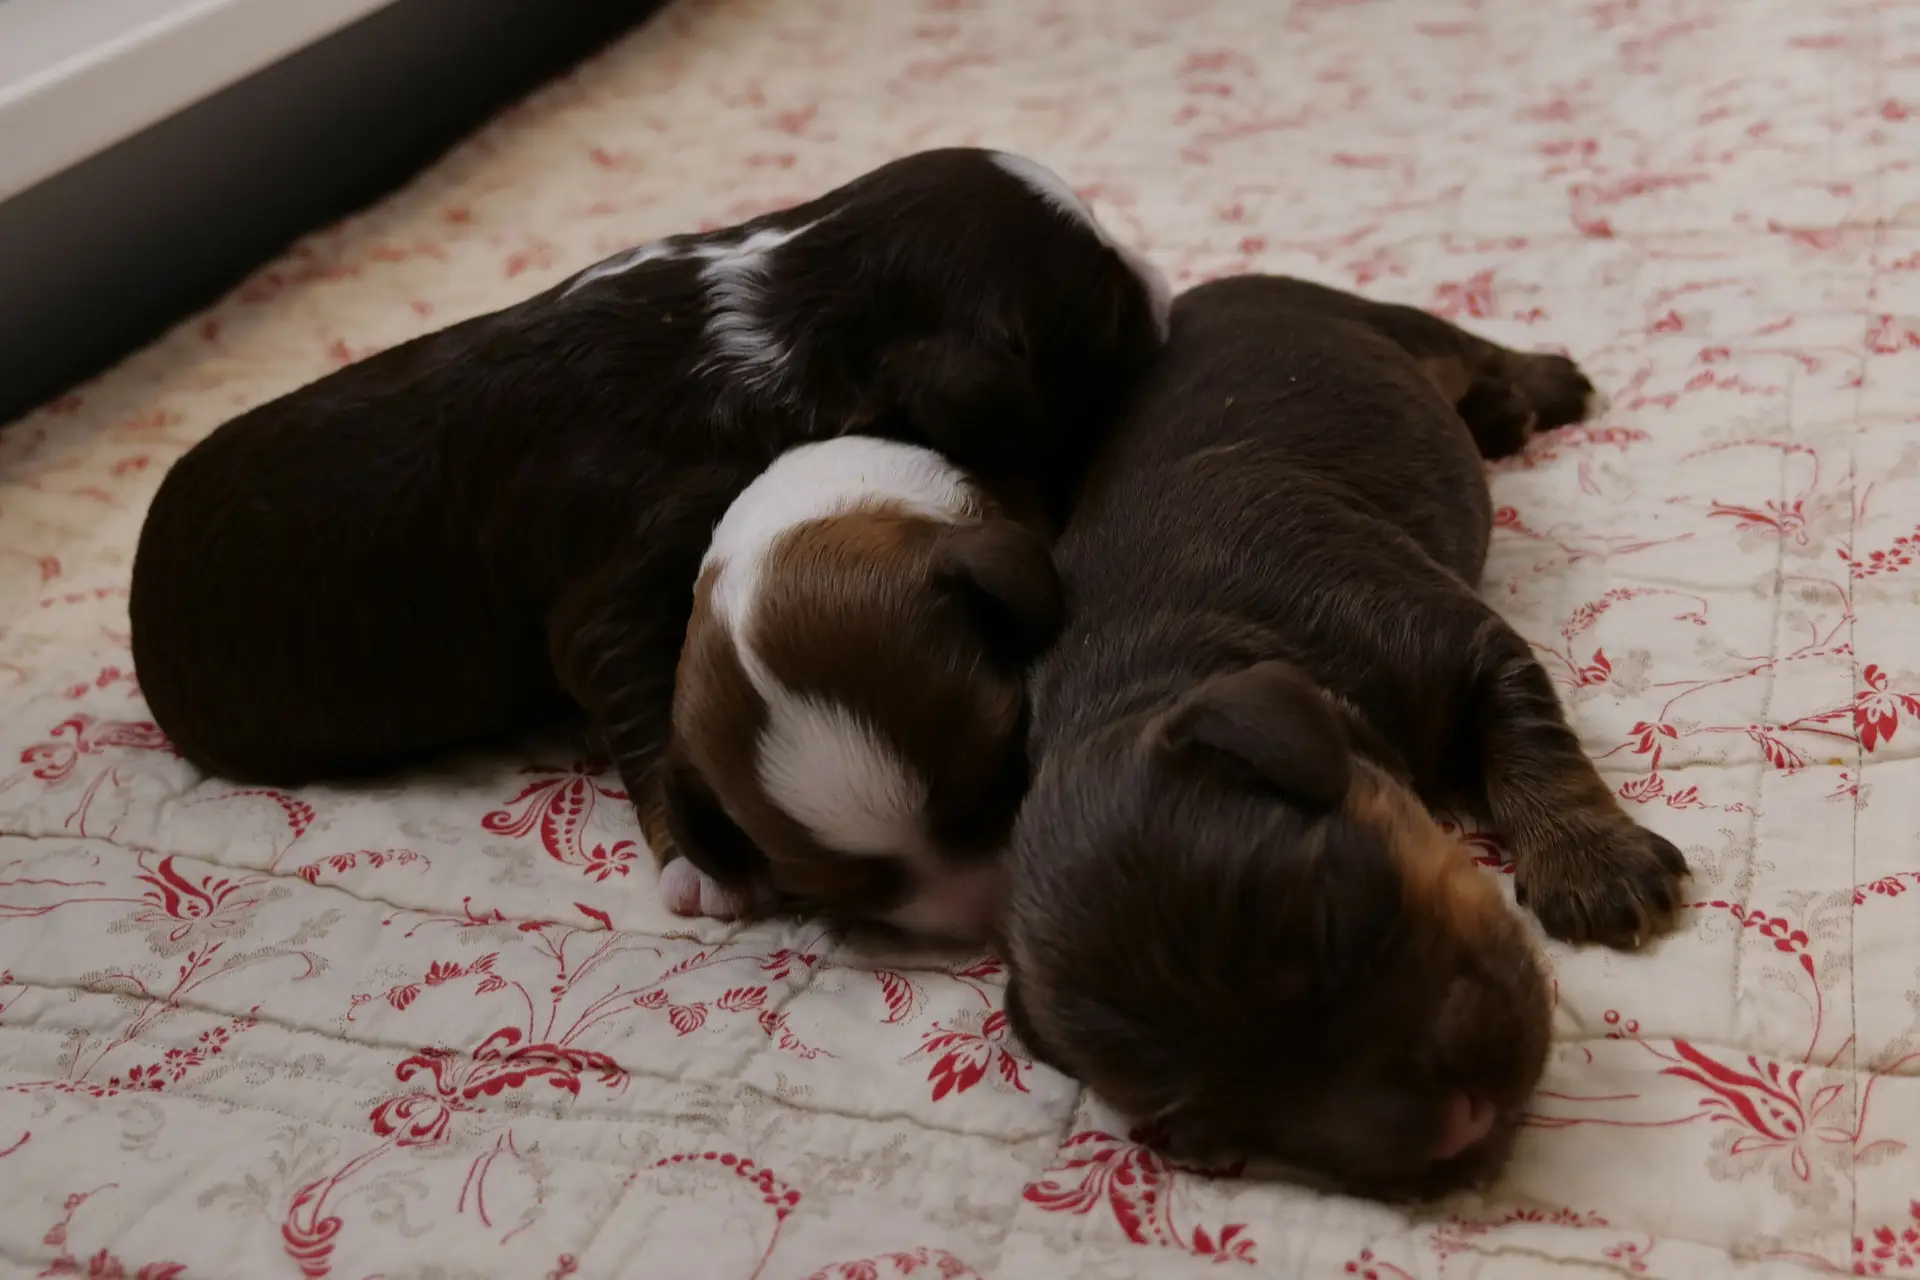 Three 1-week old labradoodle puppies sleeping. Their heads are closest to the camera. On the right is a chocolate puppy. In the middle a light chocolate and white puppy. On the left with its head on the middle one is a dark chocolate puppy with a scruff of white on its neck. They are on a white blanket with red flowers embroidered.